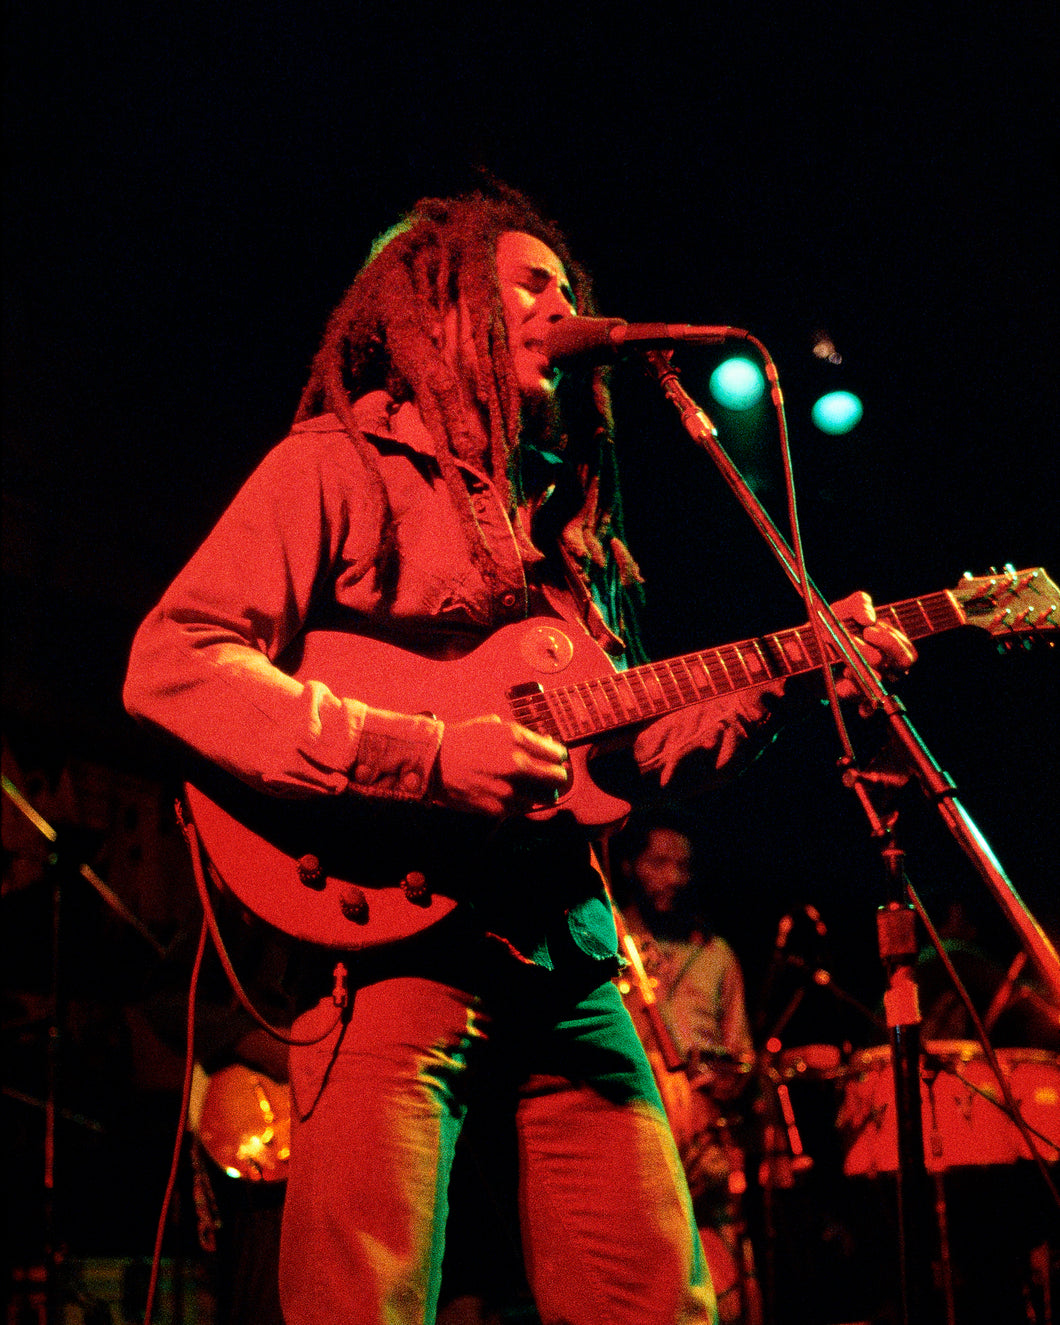 Bob Marley and The Wailers photos by Ron West